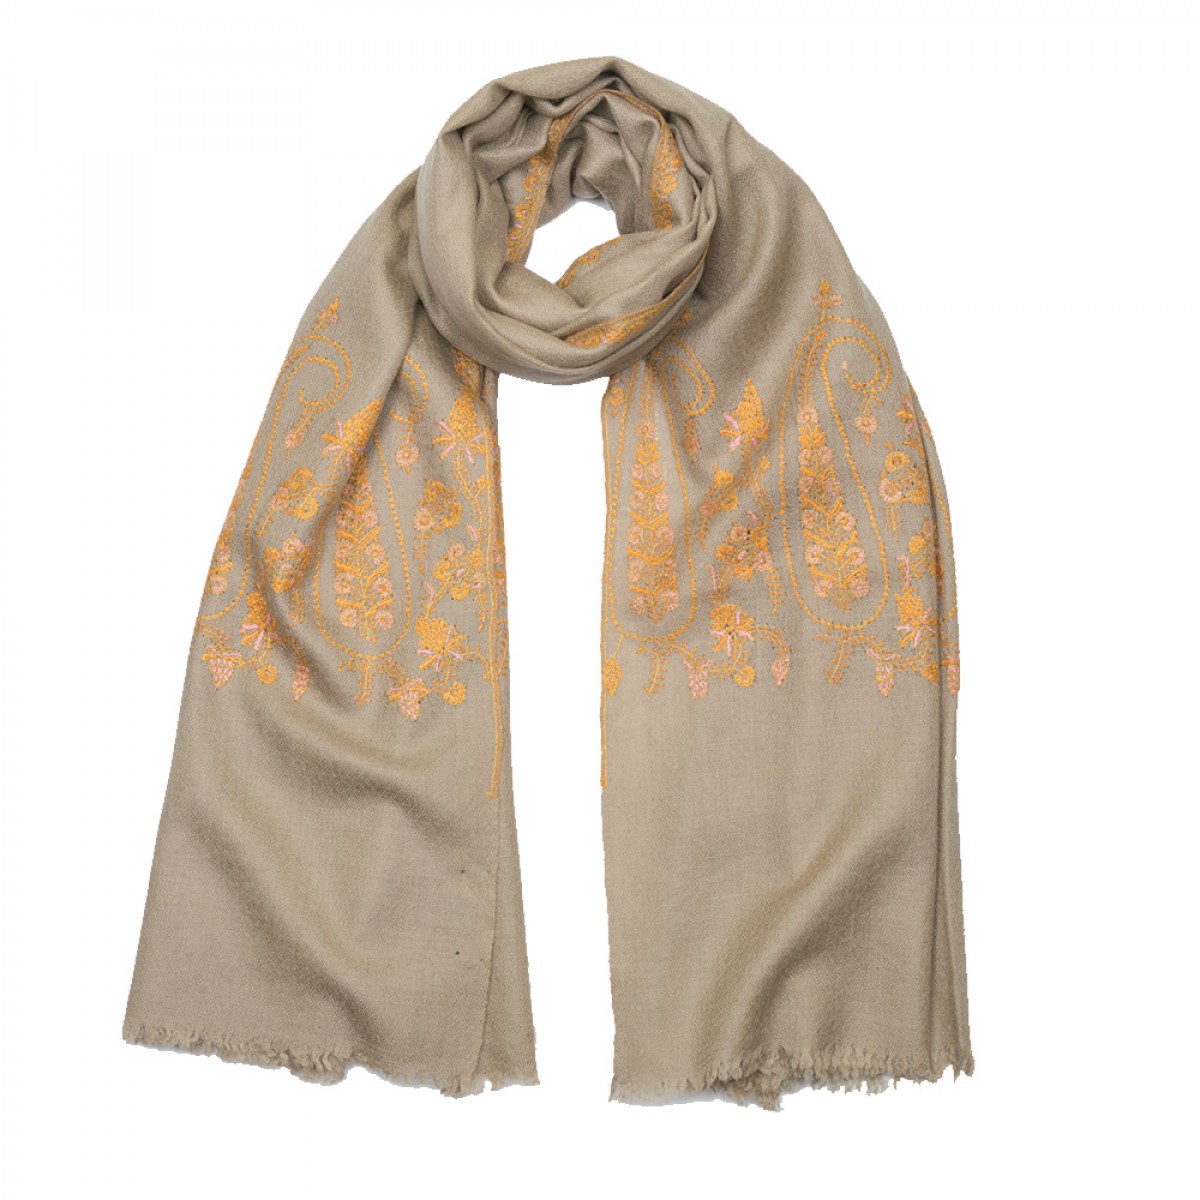 Embroidered Pashmina Stole - Natural Paisley 